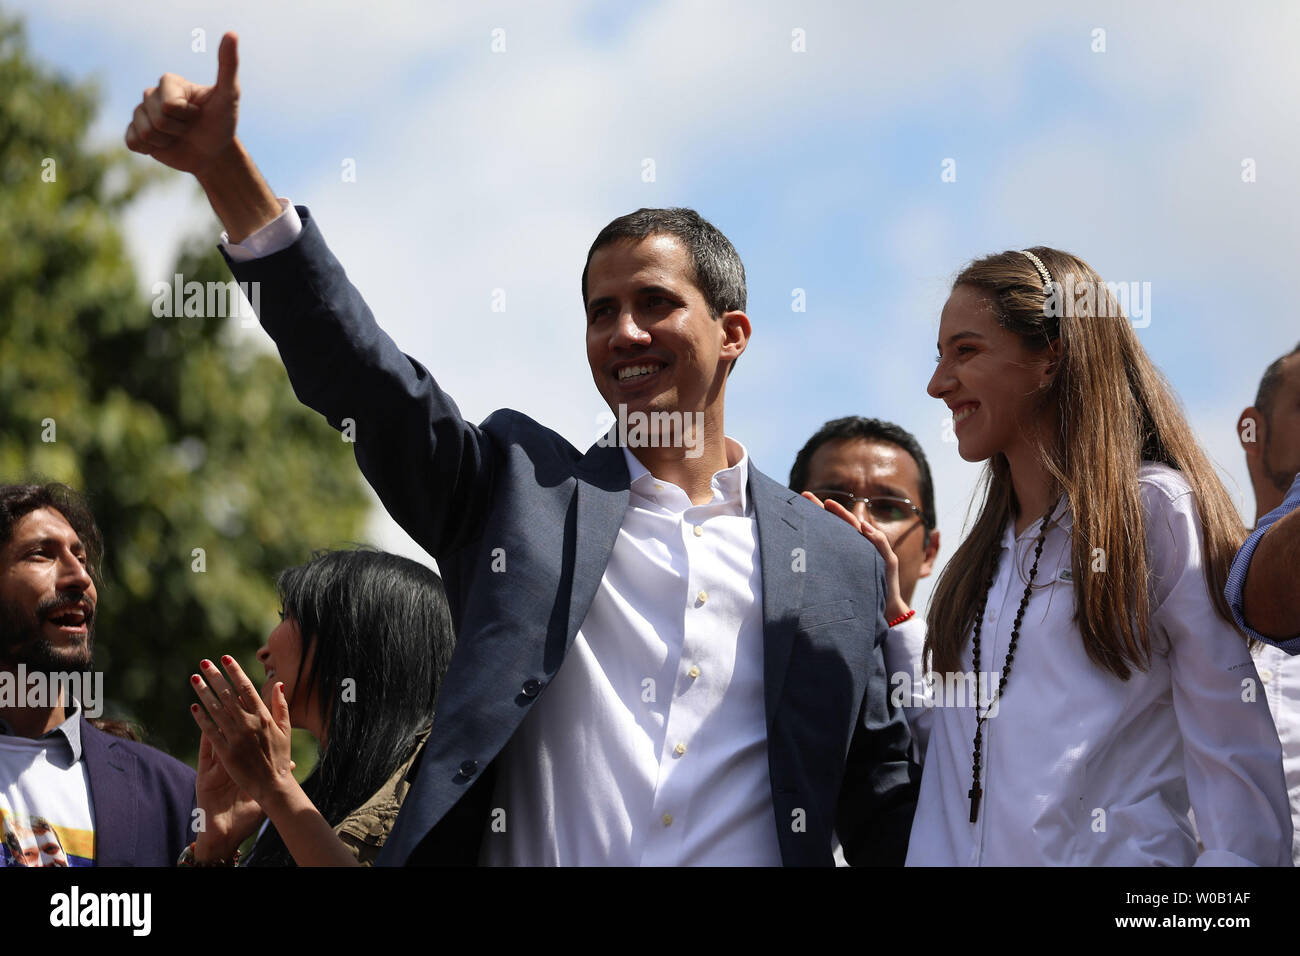 Opposition leader Juan Guaido waves at thousands of supporters during a gathering in Caracas on February 2, 2019.  Venezuelan protesters flowed into the streets of Caracas Saturday, with flags and placards, many to support opposition leader Juan Guaido's calls for democratic elections and others to back embattled President Nicolas Maduro.     Photo by Cristian Hernandez/UPI Stock Photo